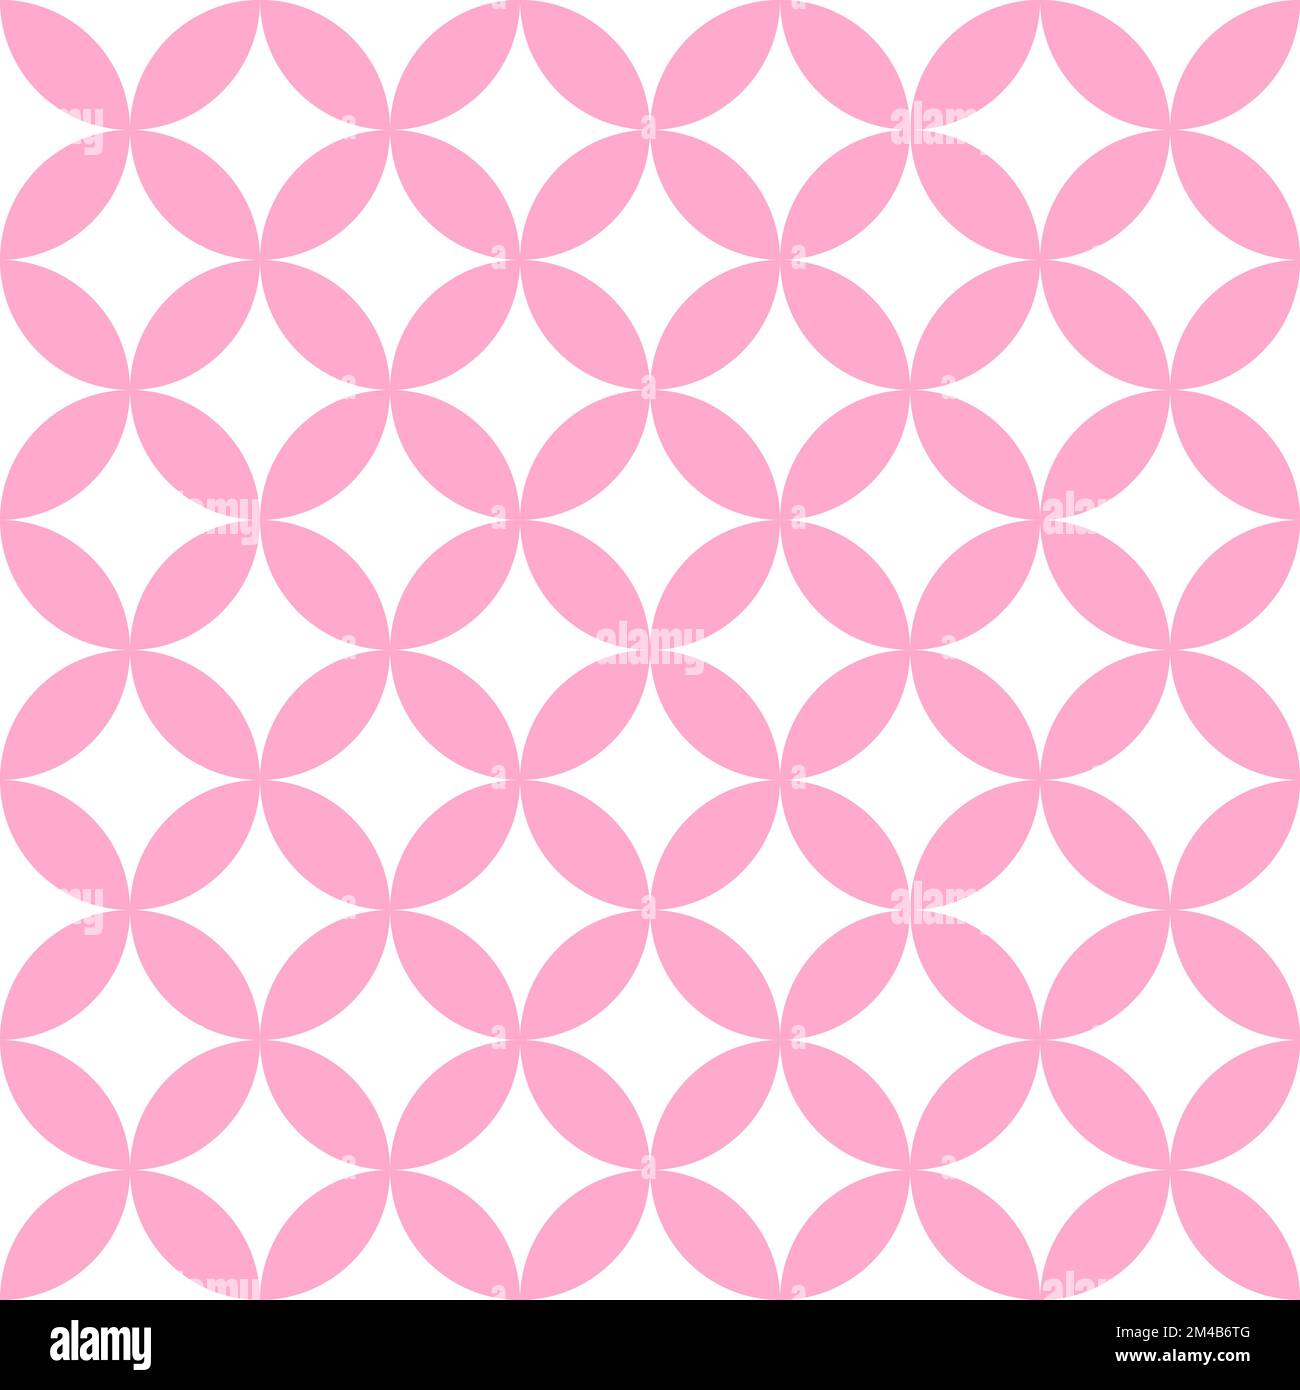 Pink on white overlapping circles seamless texture. Classic ovals and circles vector geometric fashion pattern. Stock Vector